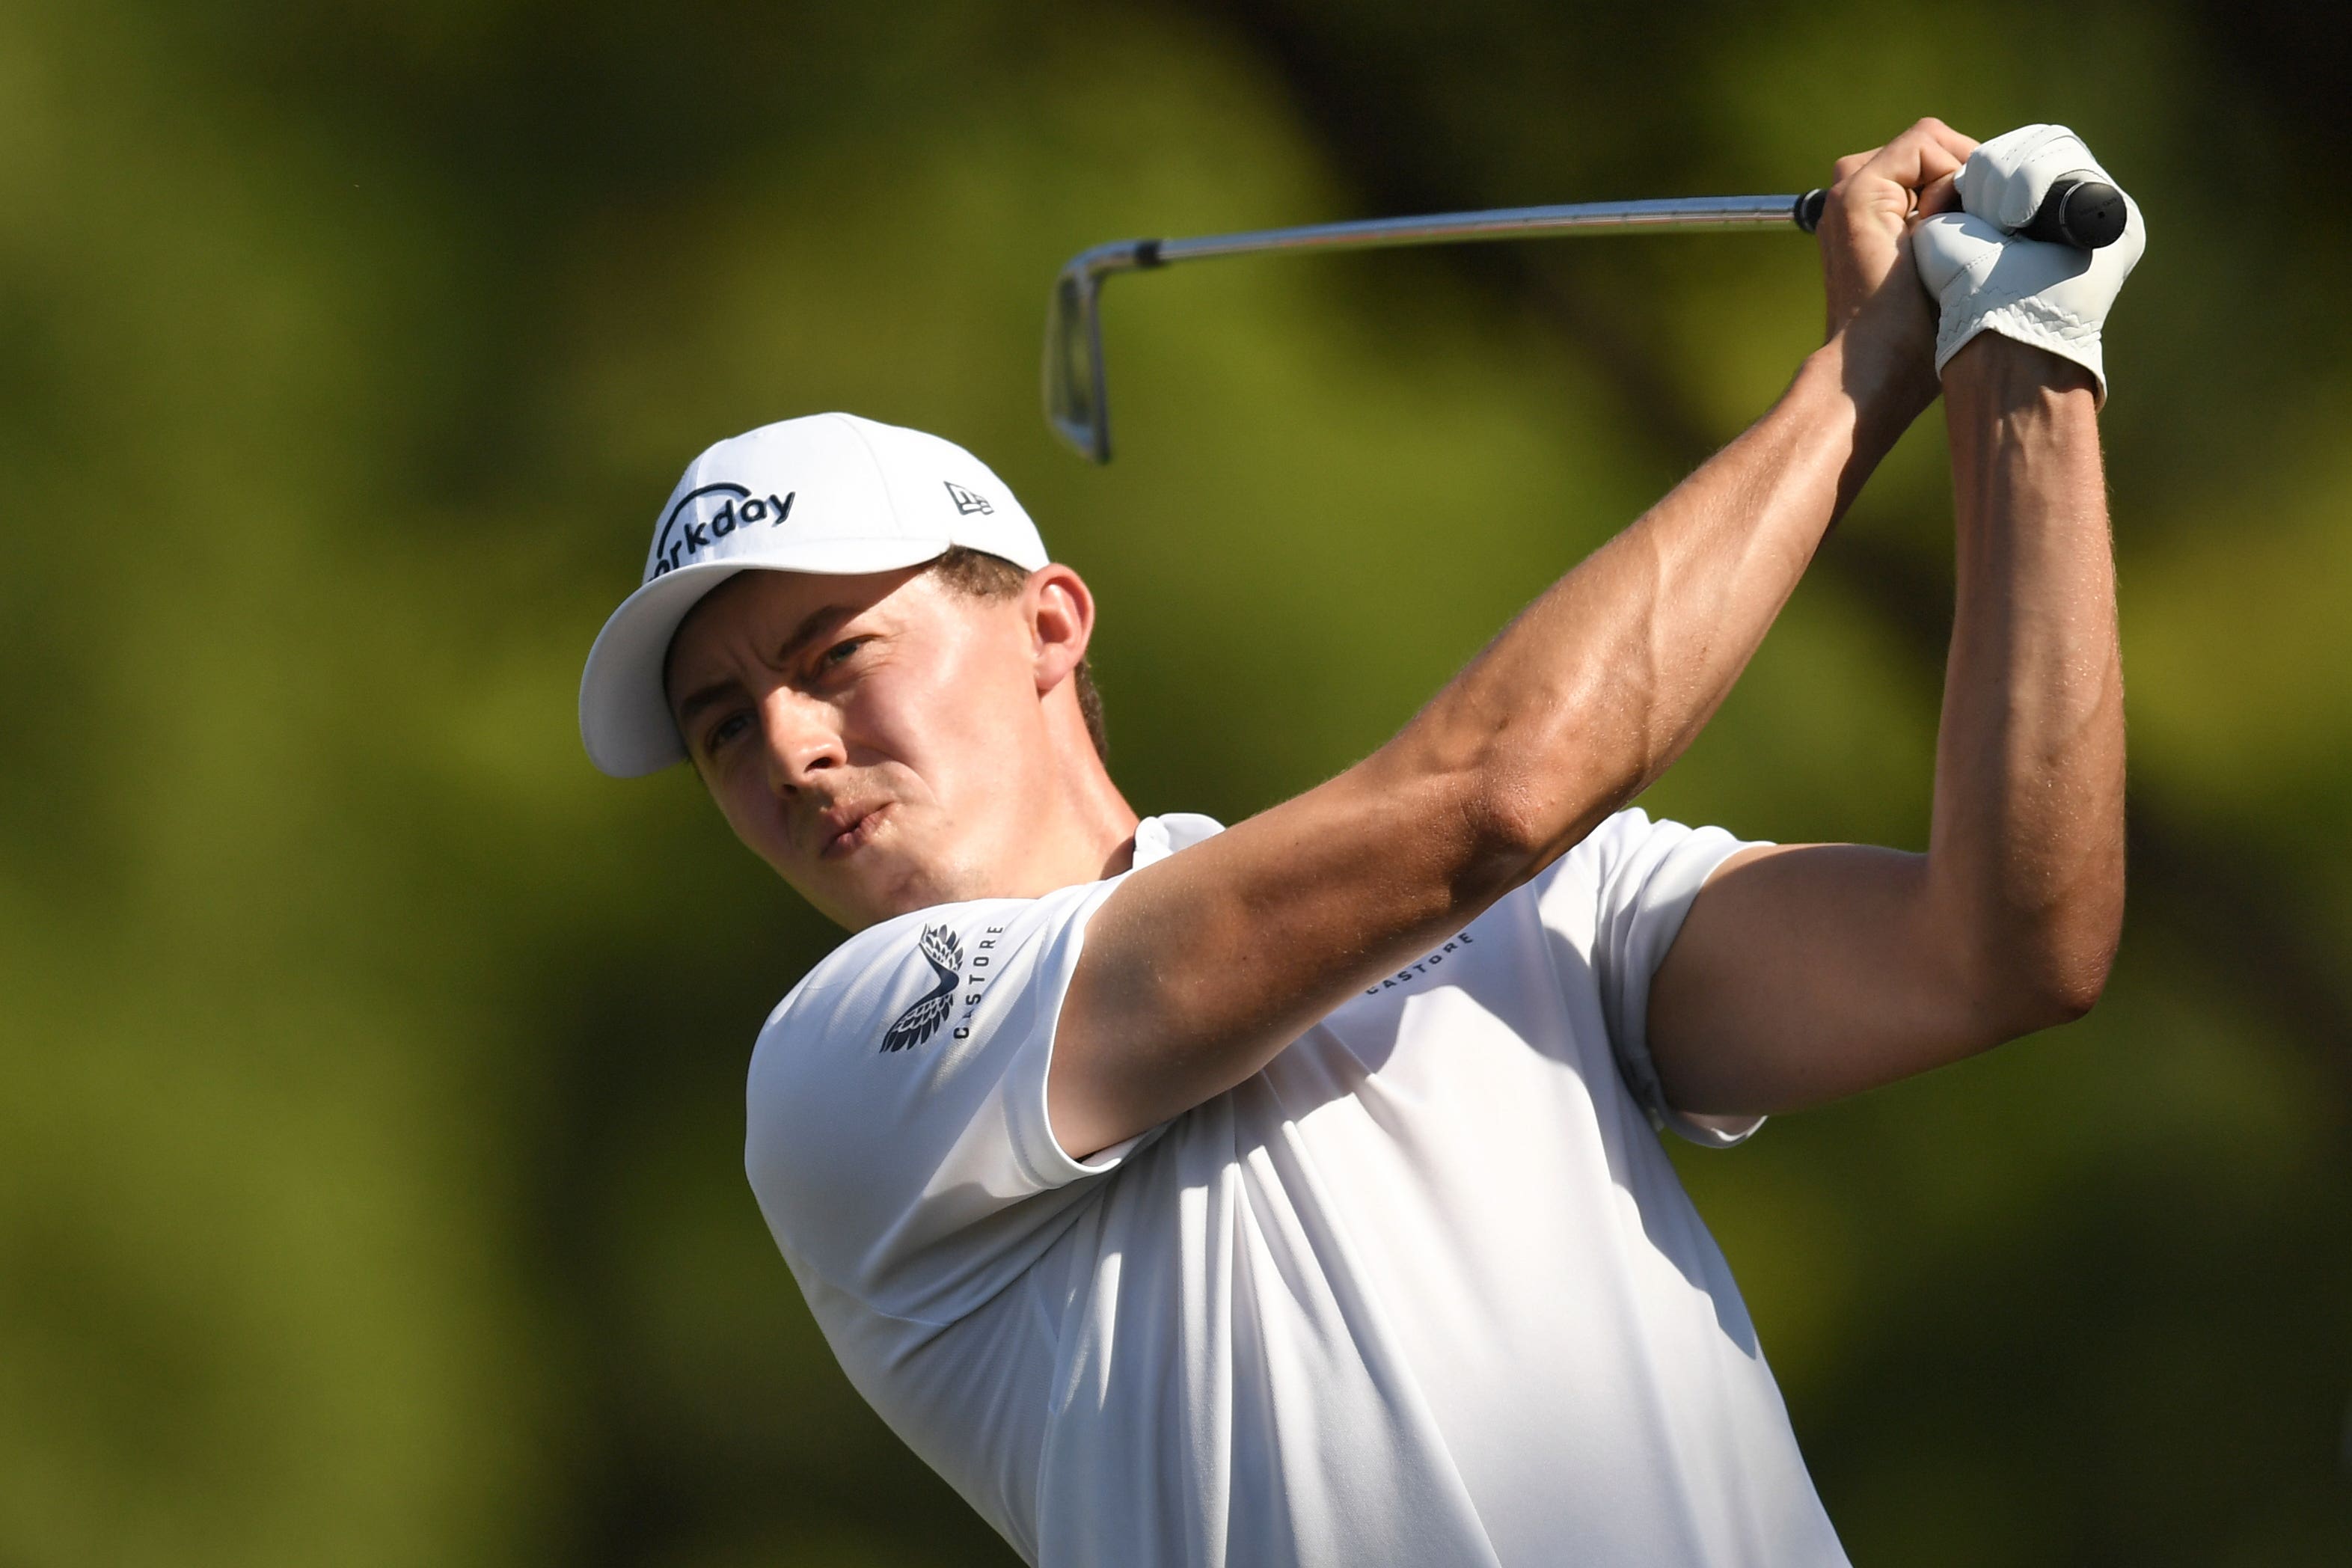 Matt Fitzpatrick shares the lead with Tyrrell Hatton in the DP World Tour Championship (Martin Dokoupil/AP)